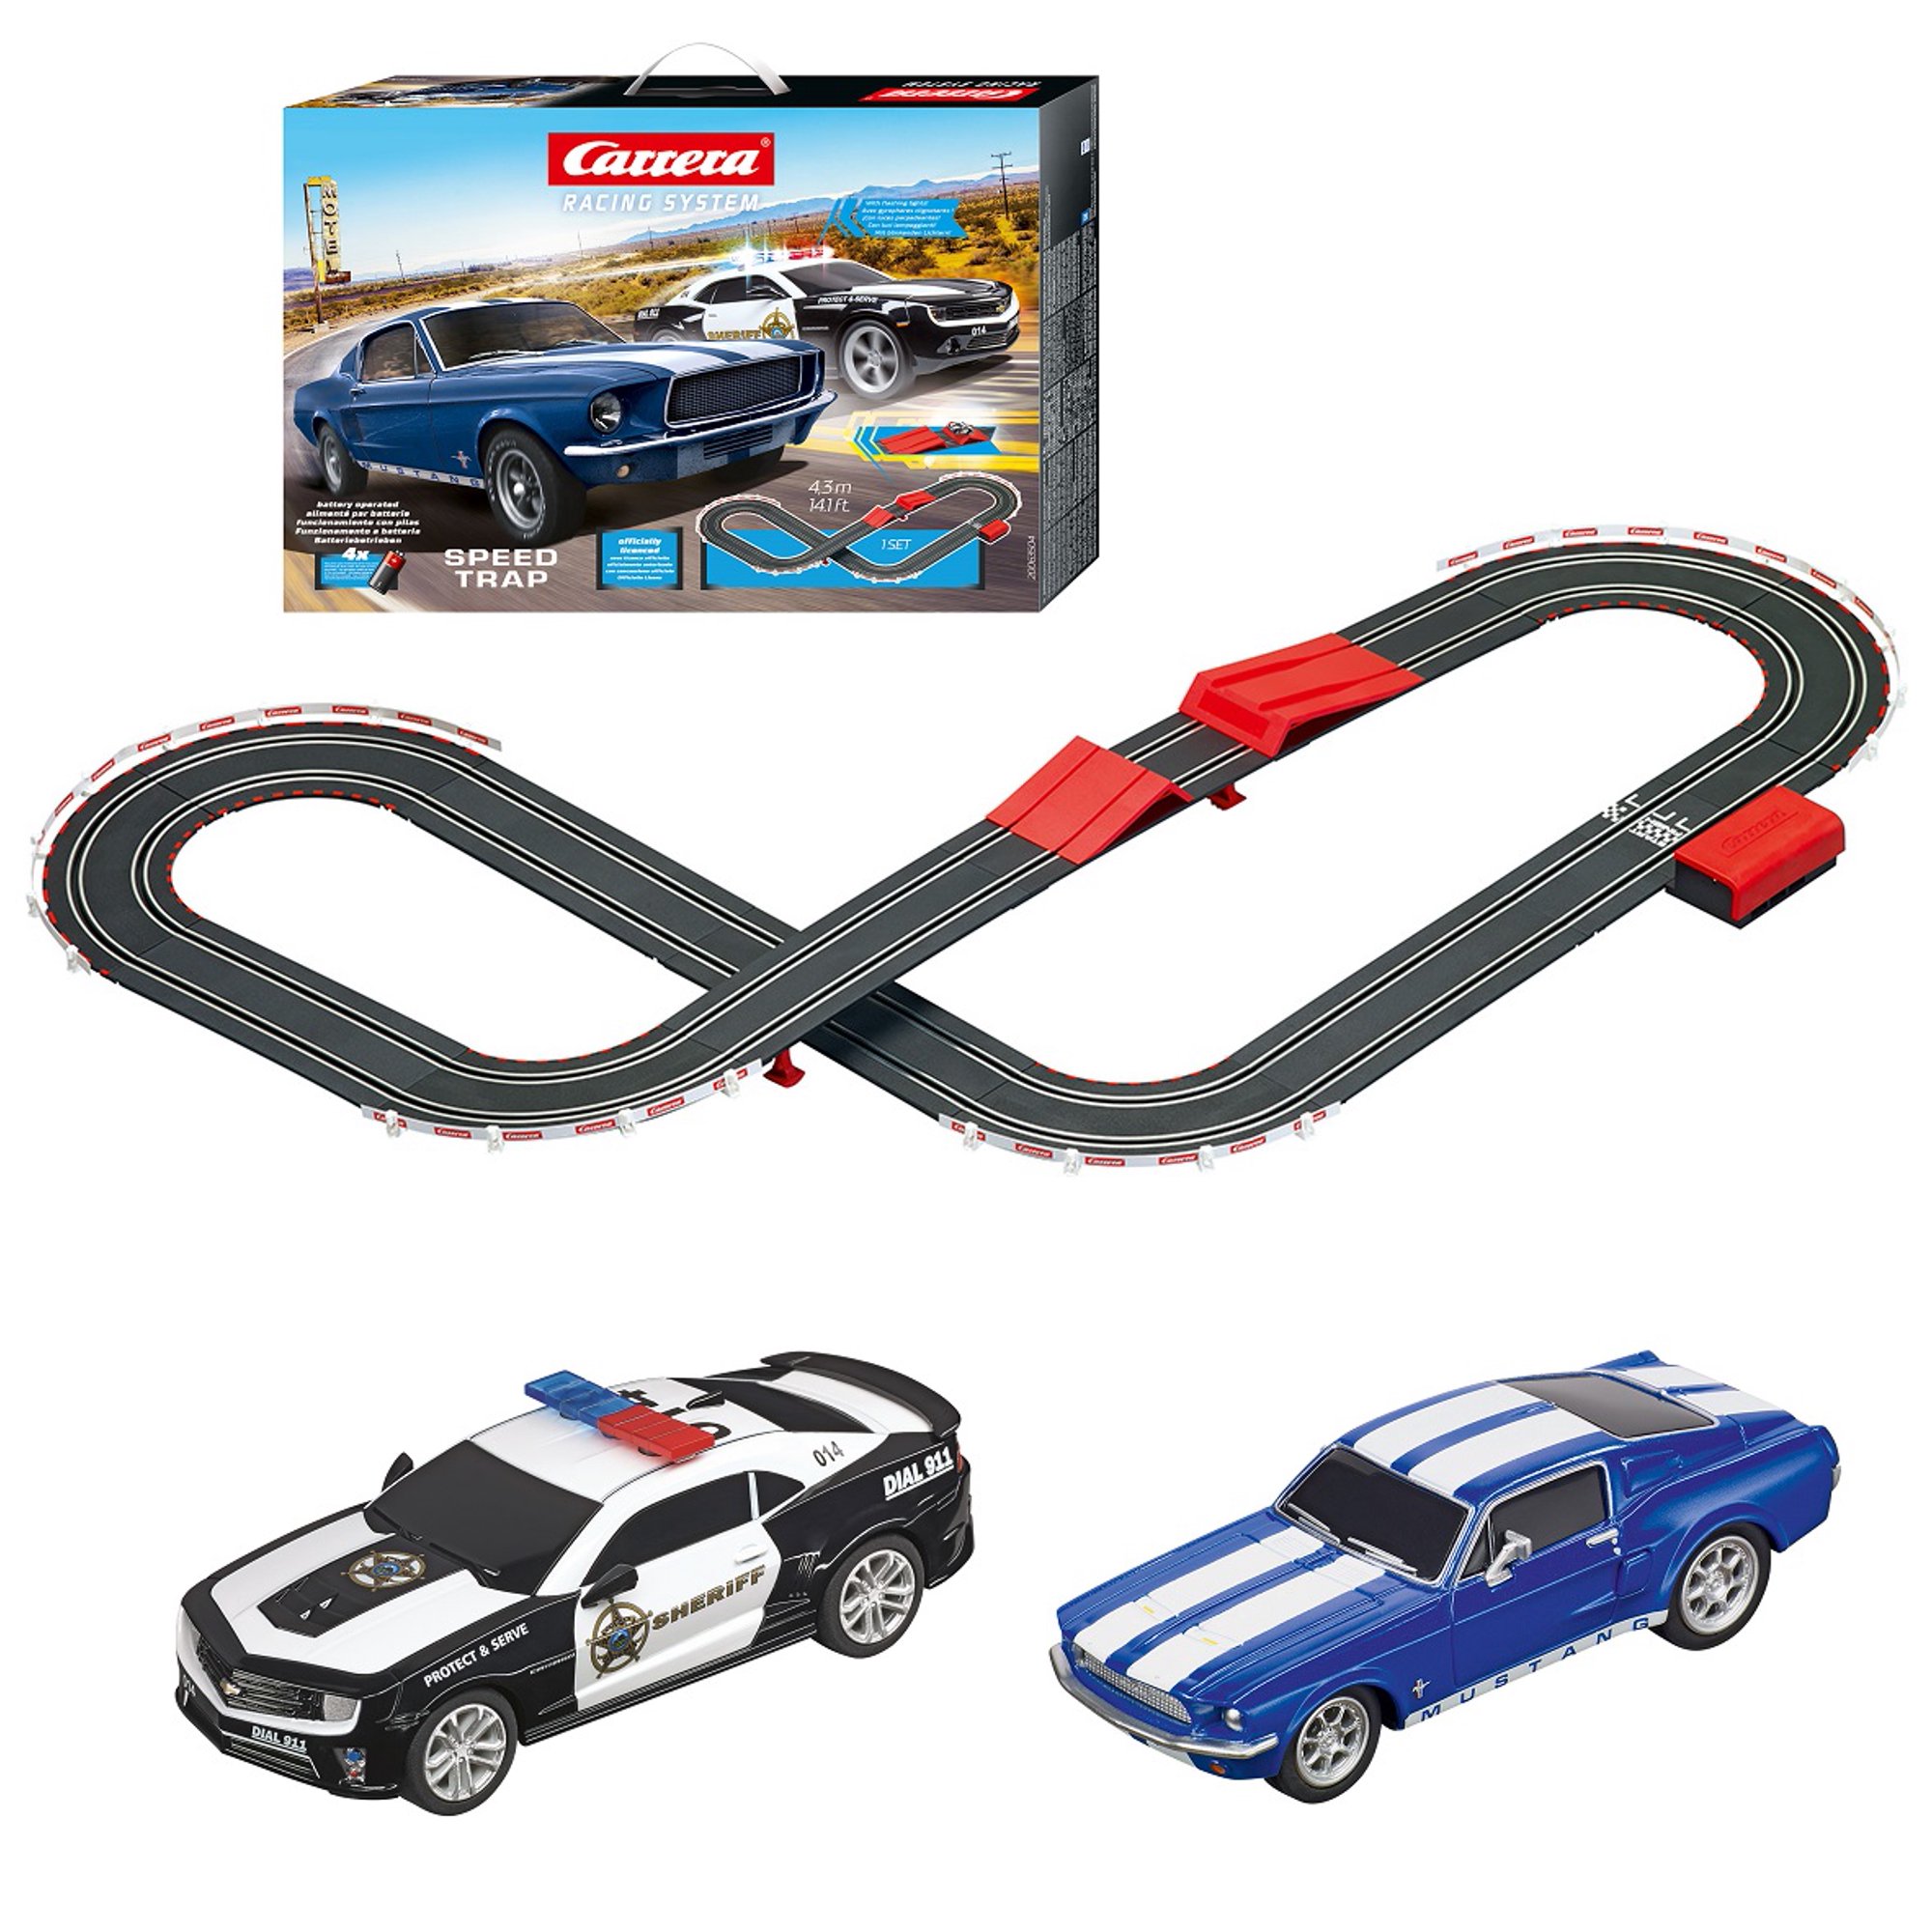 Carrera Battery Operated 1:43 Scale Speed Trap Slot Car Race Track Set $30 + FS w/ Walmart+ or FS on $35+